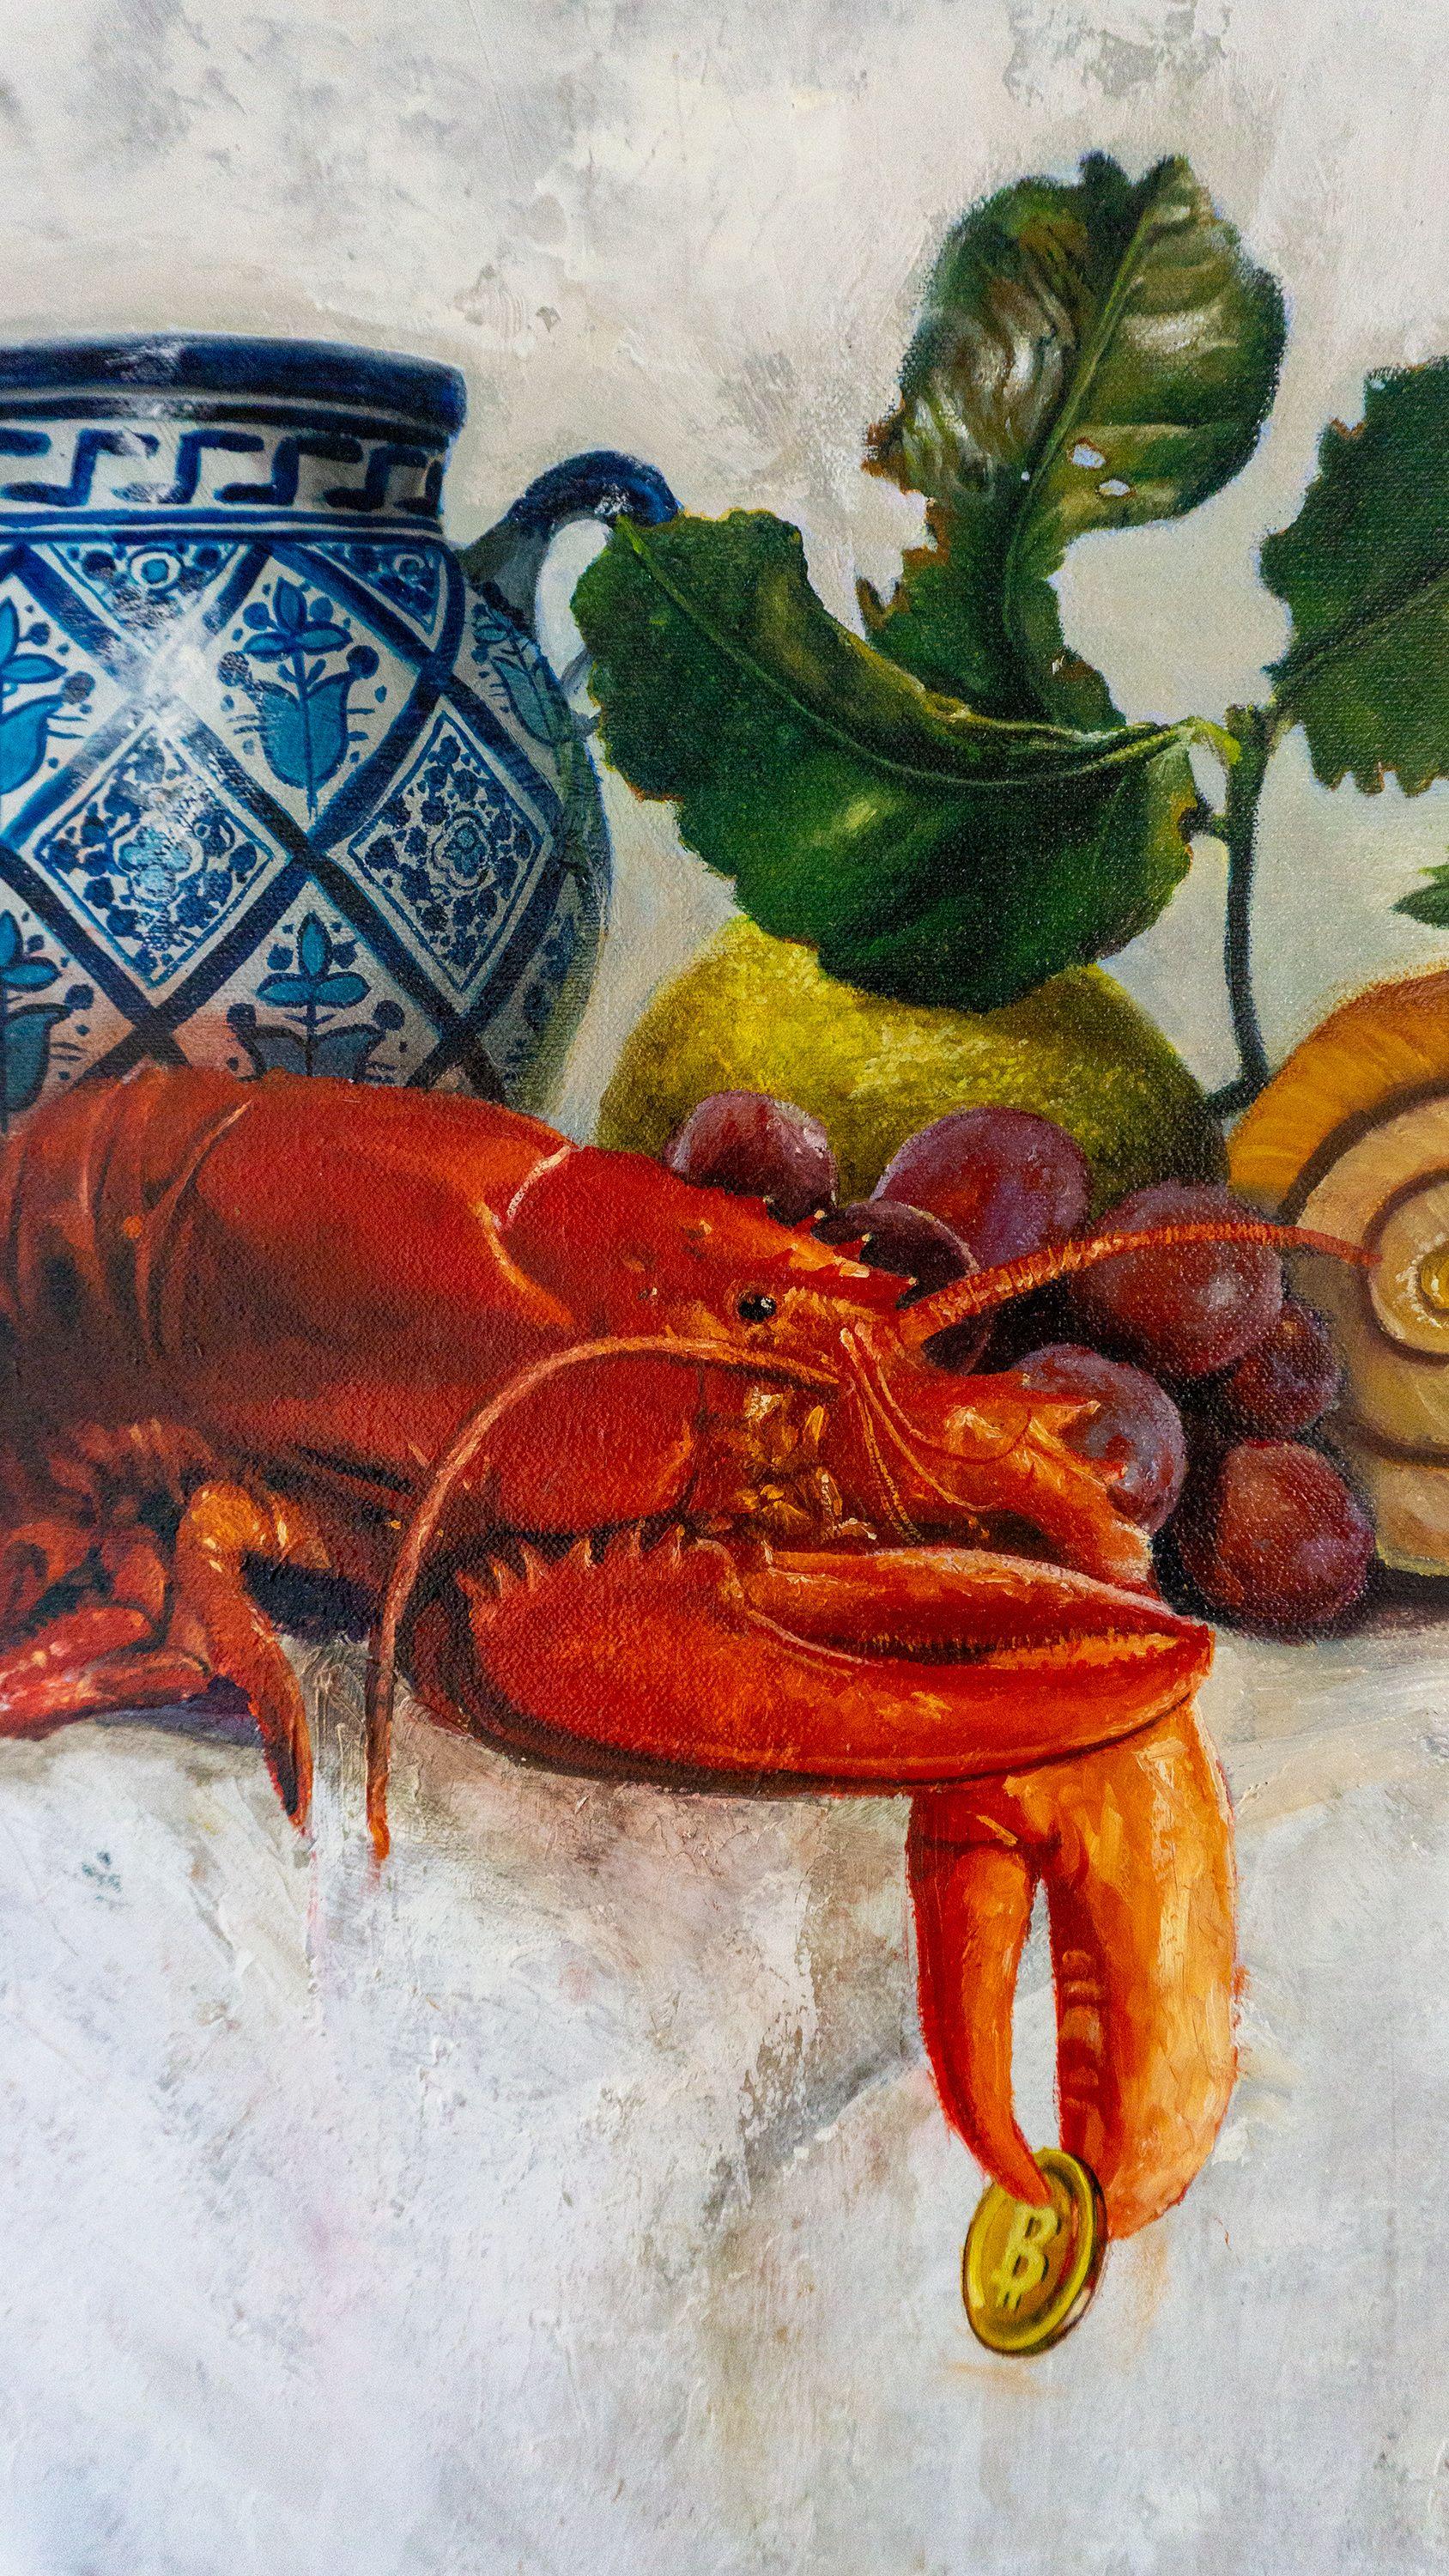 Krakky the Lobster has invited a few friends to the Bitcoin party including a Gold Unicorn and William the Hippo -- MET Museum official mascot. A couple of exotic seashells and a mediterranean vase compliment this very unique high quality Still